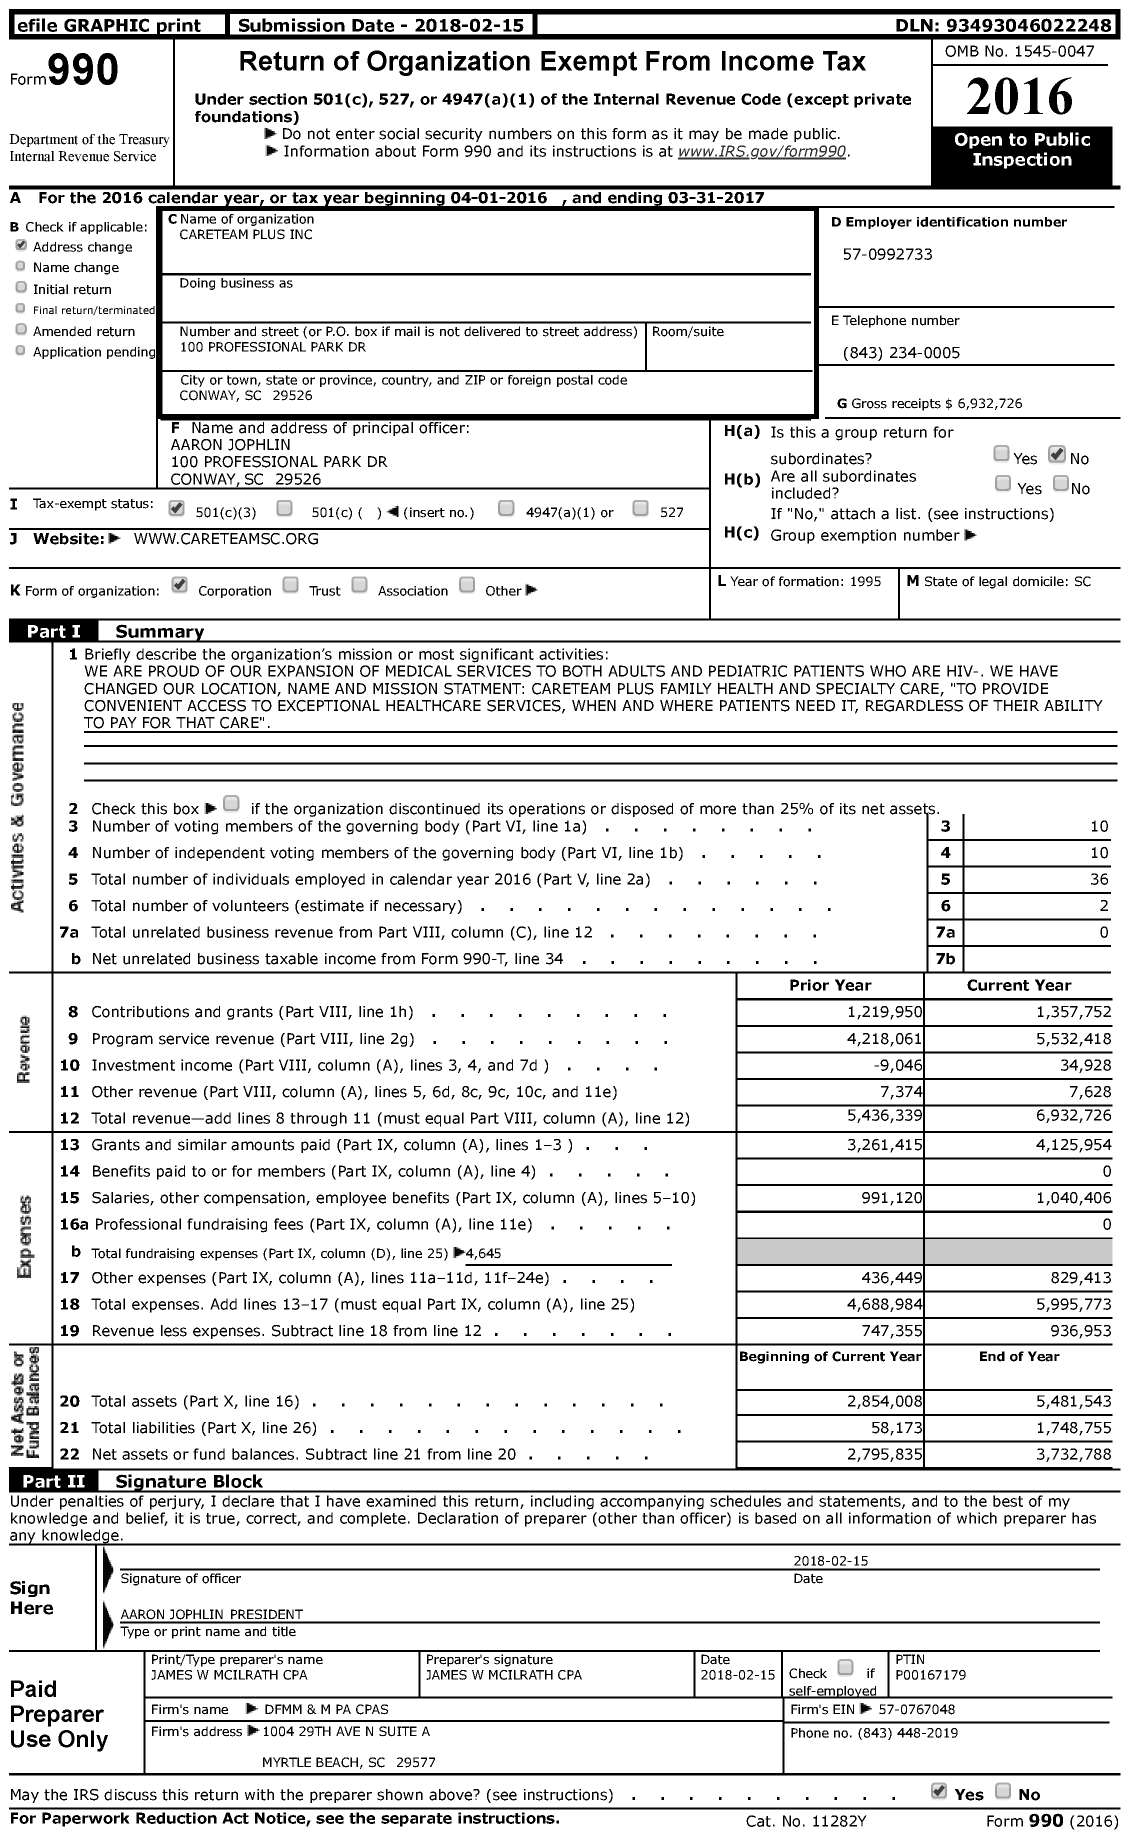 Image of first page of 2016 Form 990 for Careteam Plus